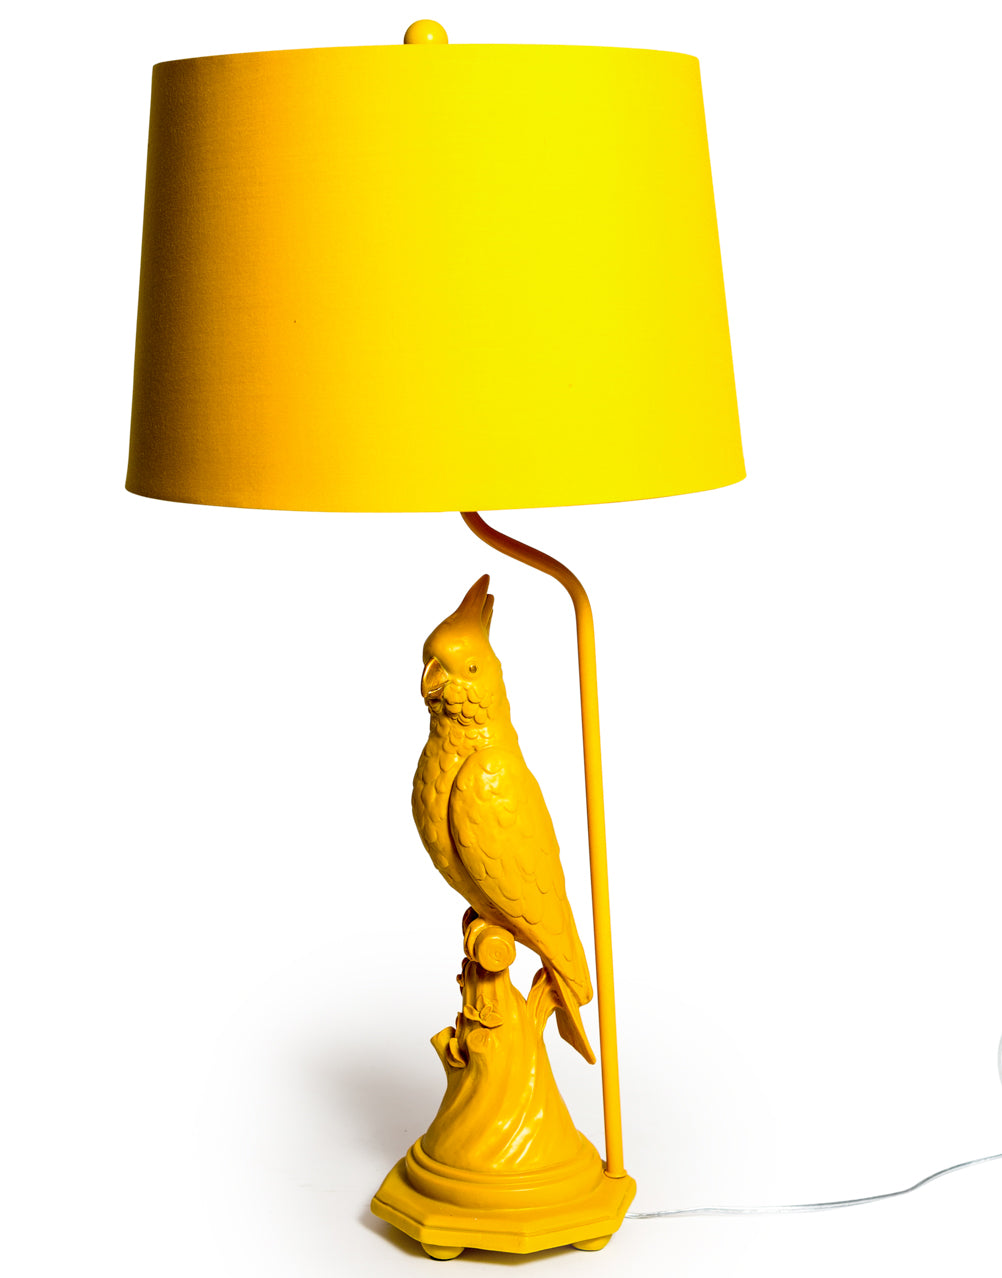 Parrot Table Lamp With Metallic Lined Shade